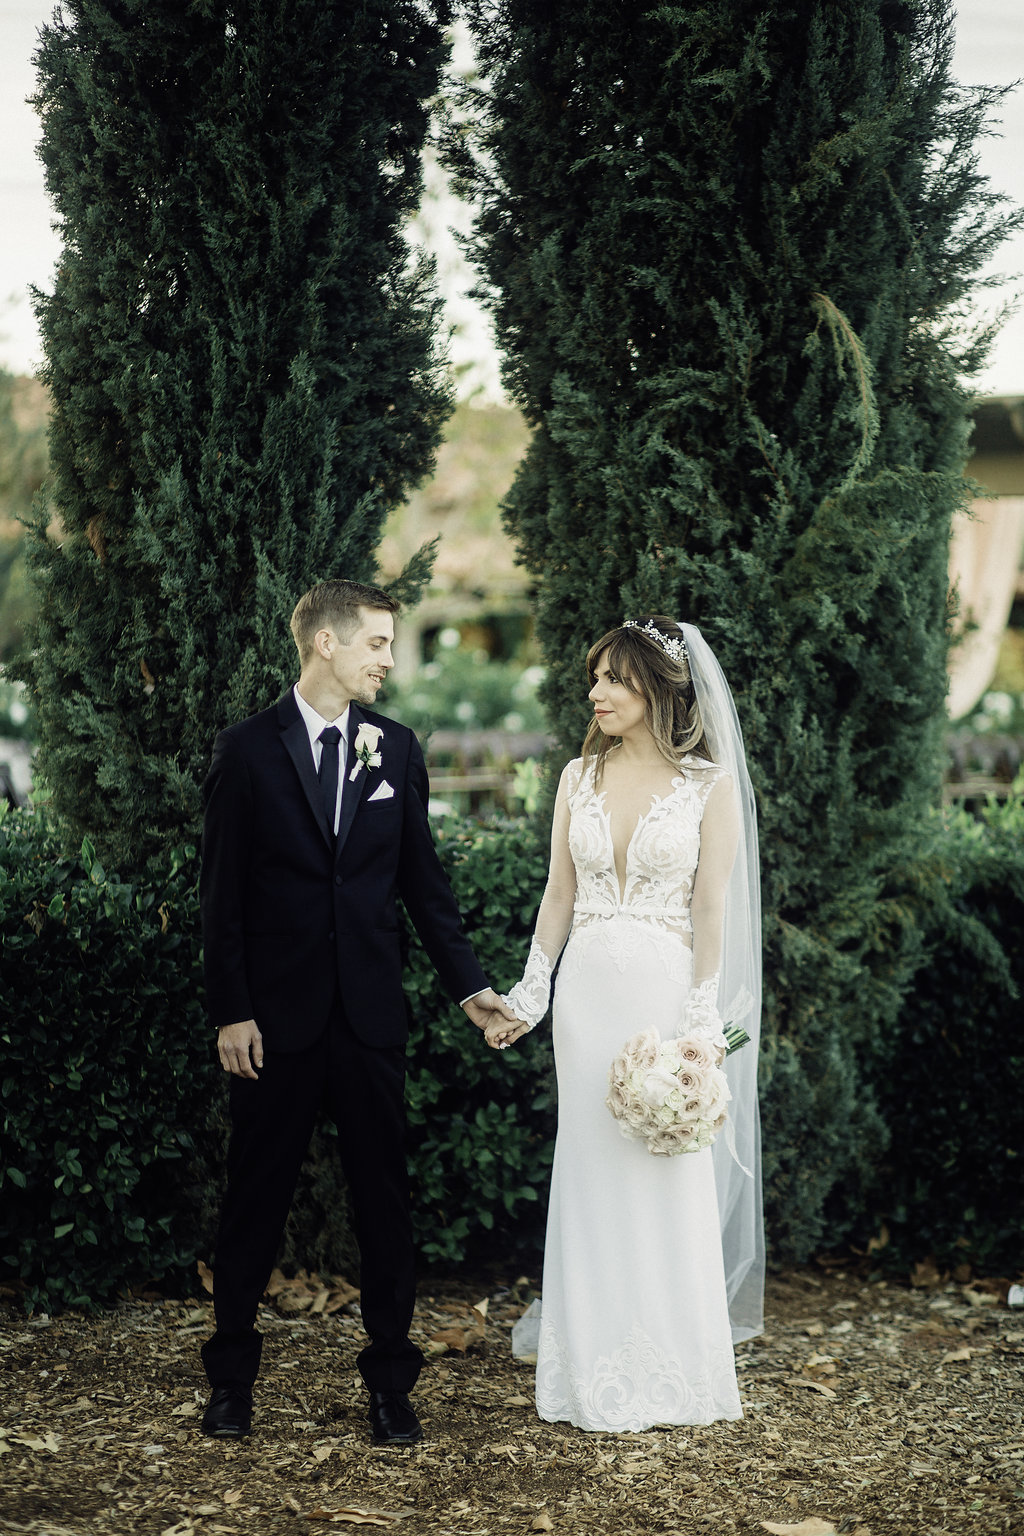 Wedding Photograph Of Bride And Groom Staring At Each Other In The Garden Los Angeles